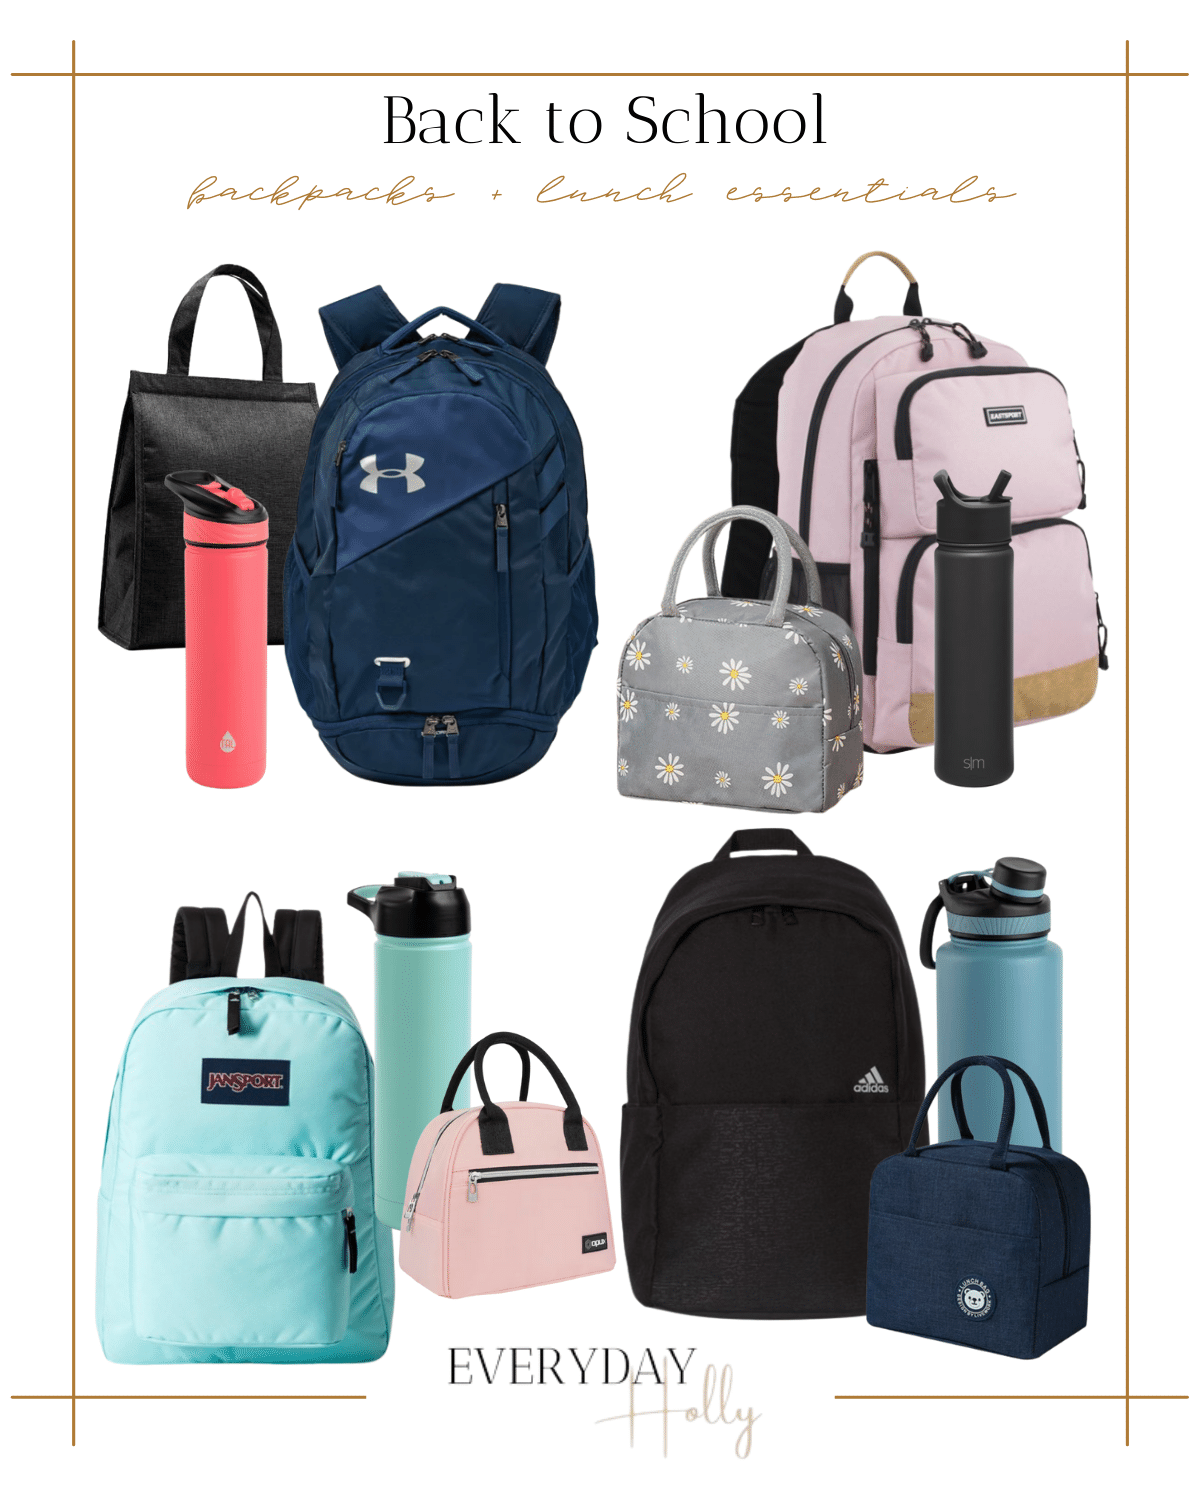 Back to School | Lunchroom Essentials

#backtoschool #b2s #schoolyear #yearschool #backtoschoolyear #backtoschoolessentials #lunchbox #kidsbackpack #backtoschoolshopping #B2sshopping #backpack #waterbottle #underarmour #jansport #adidas